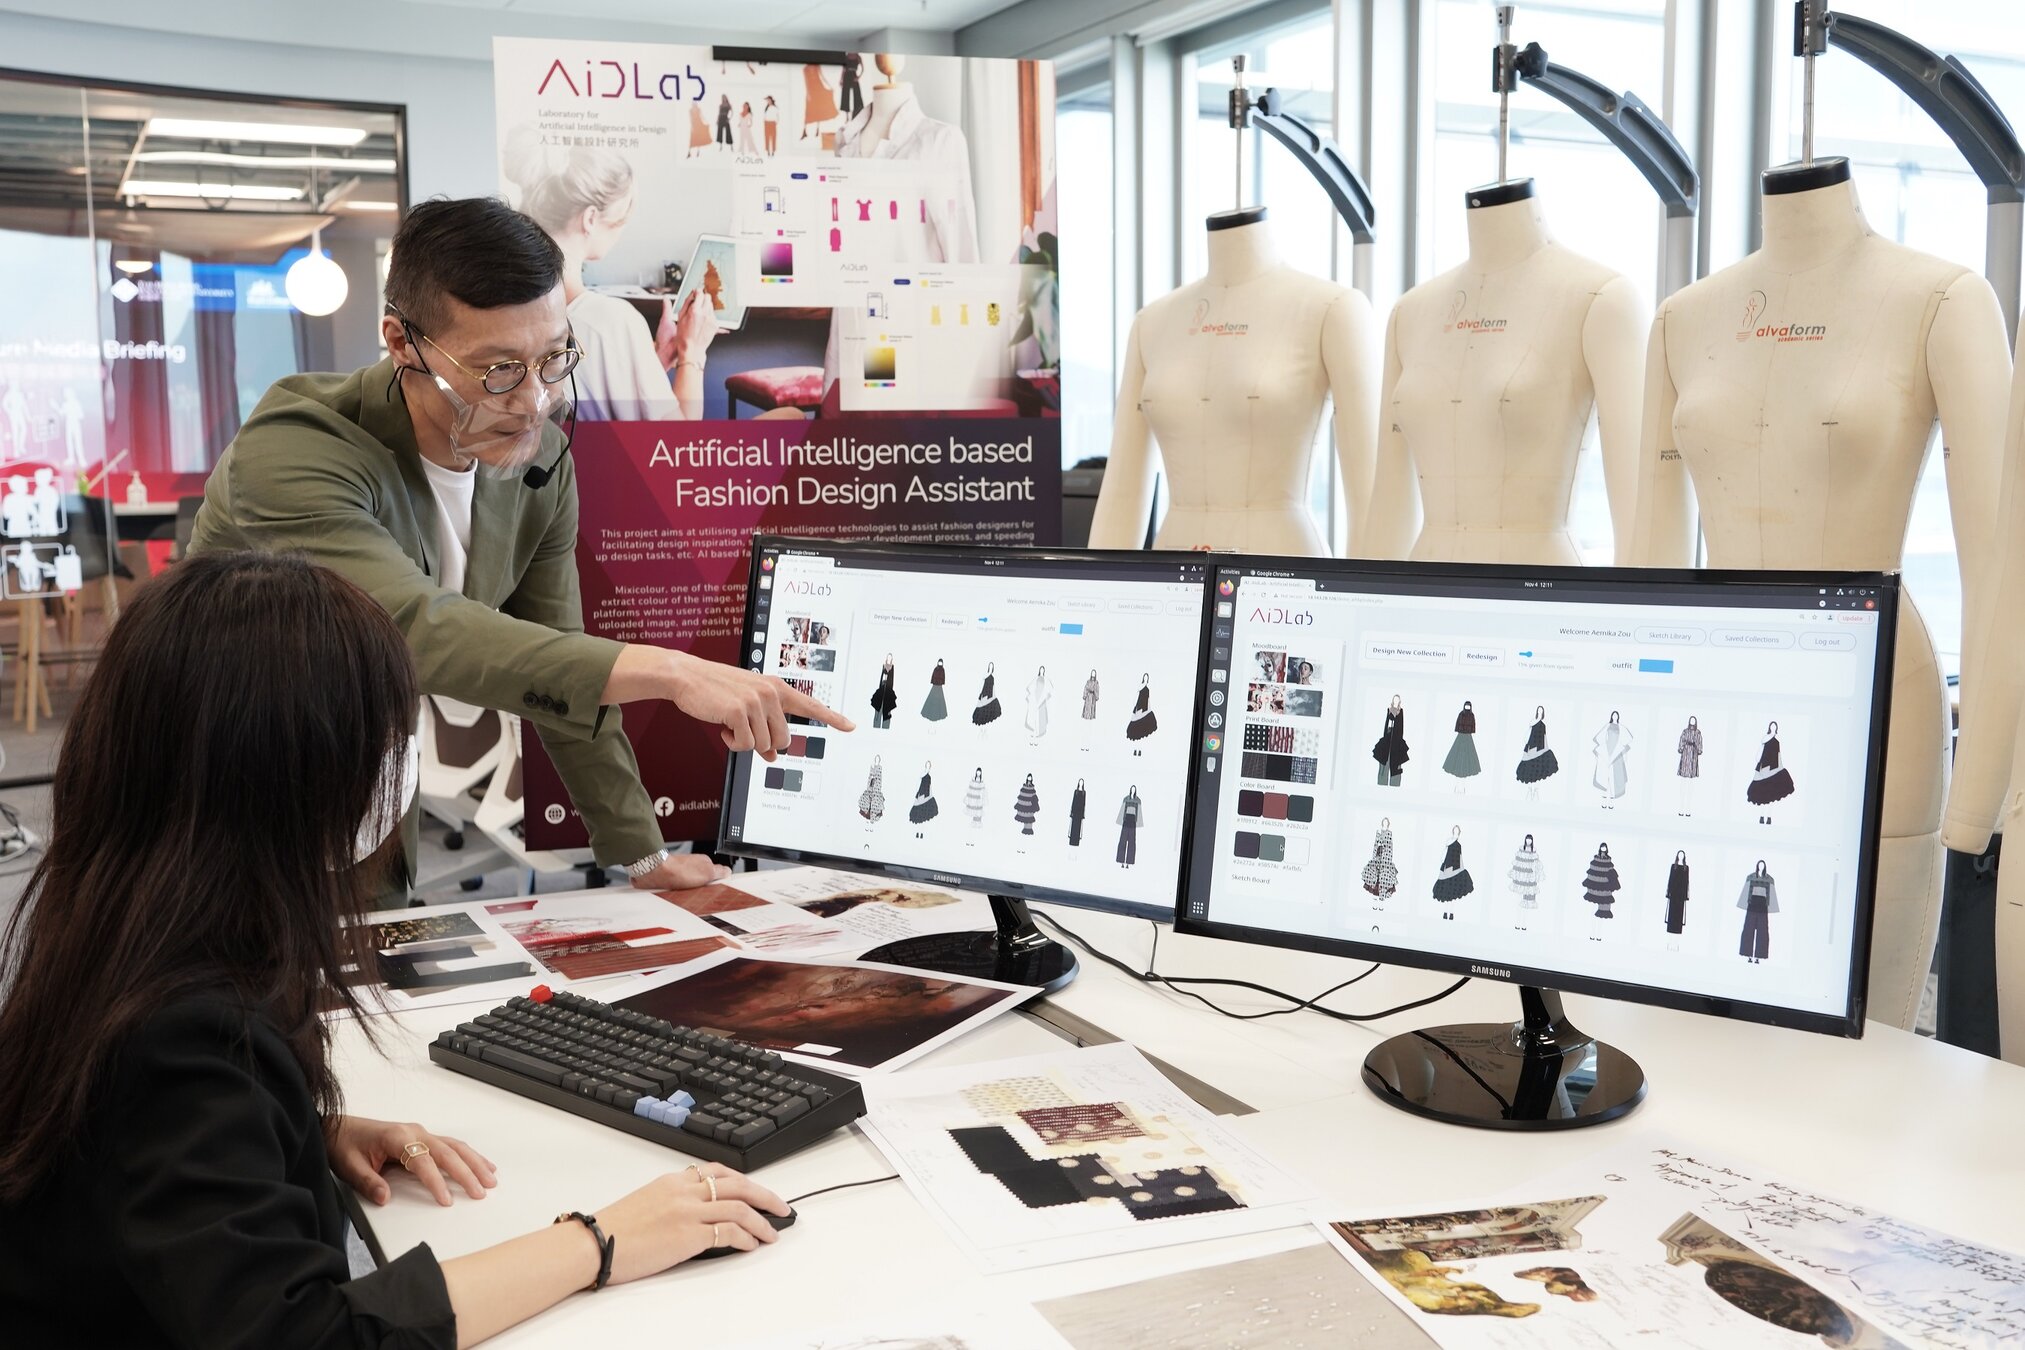 Research programme “Intelligent Fashion Design and Quality Control” focuses on algorithmic design that integrates machine intelligence and human knowledge with respect to fashion and textiles, leading to advances in design, quality control and manufacturing processes.